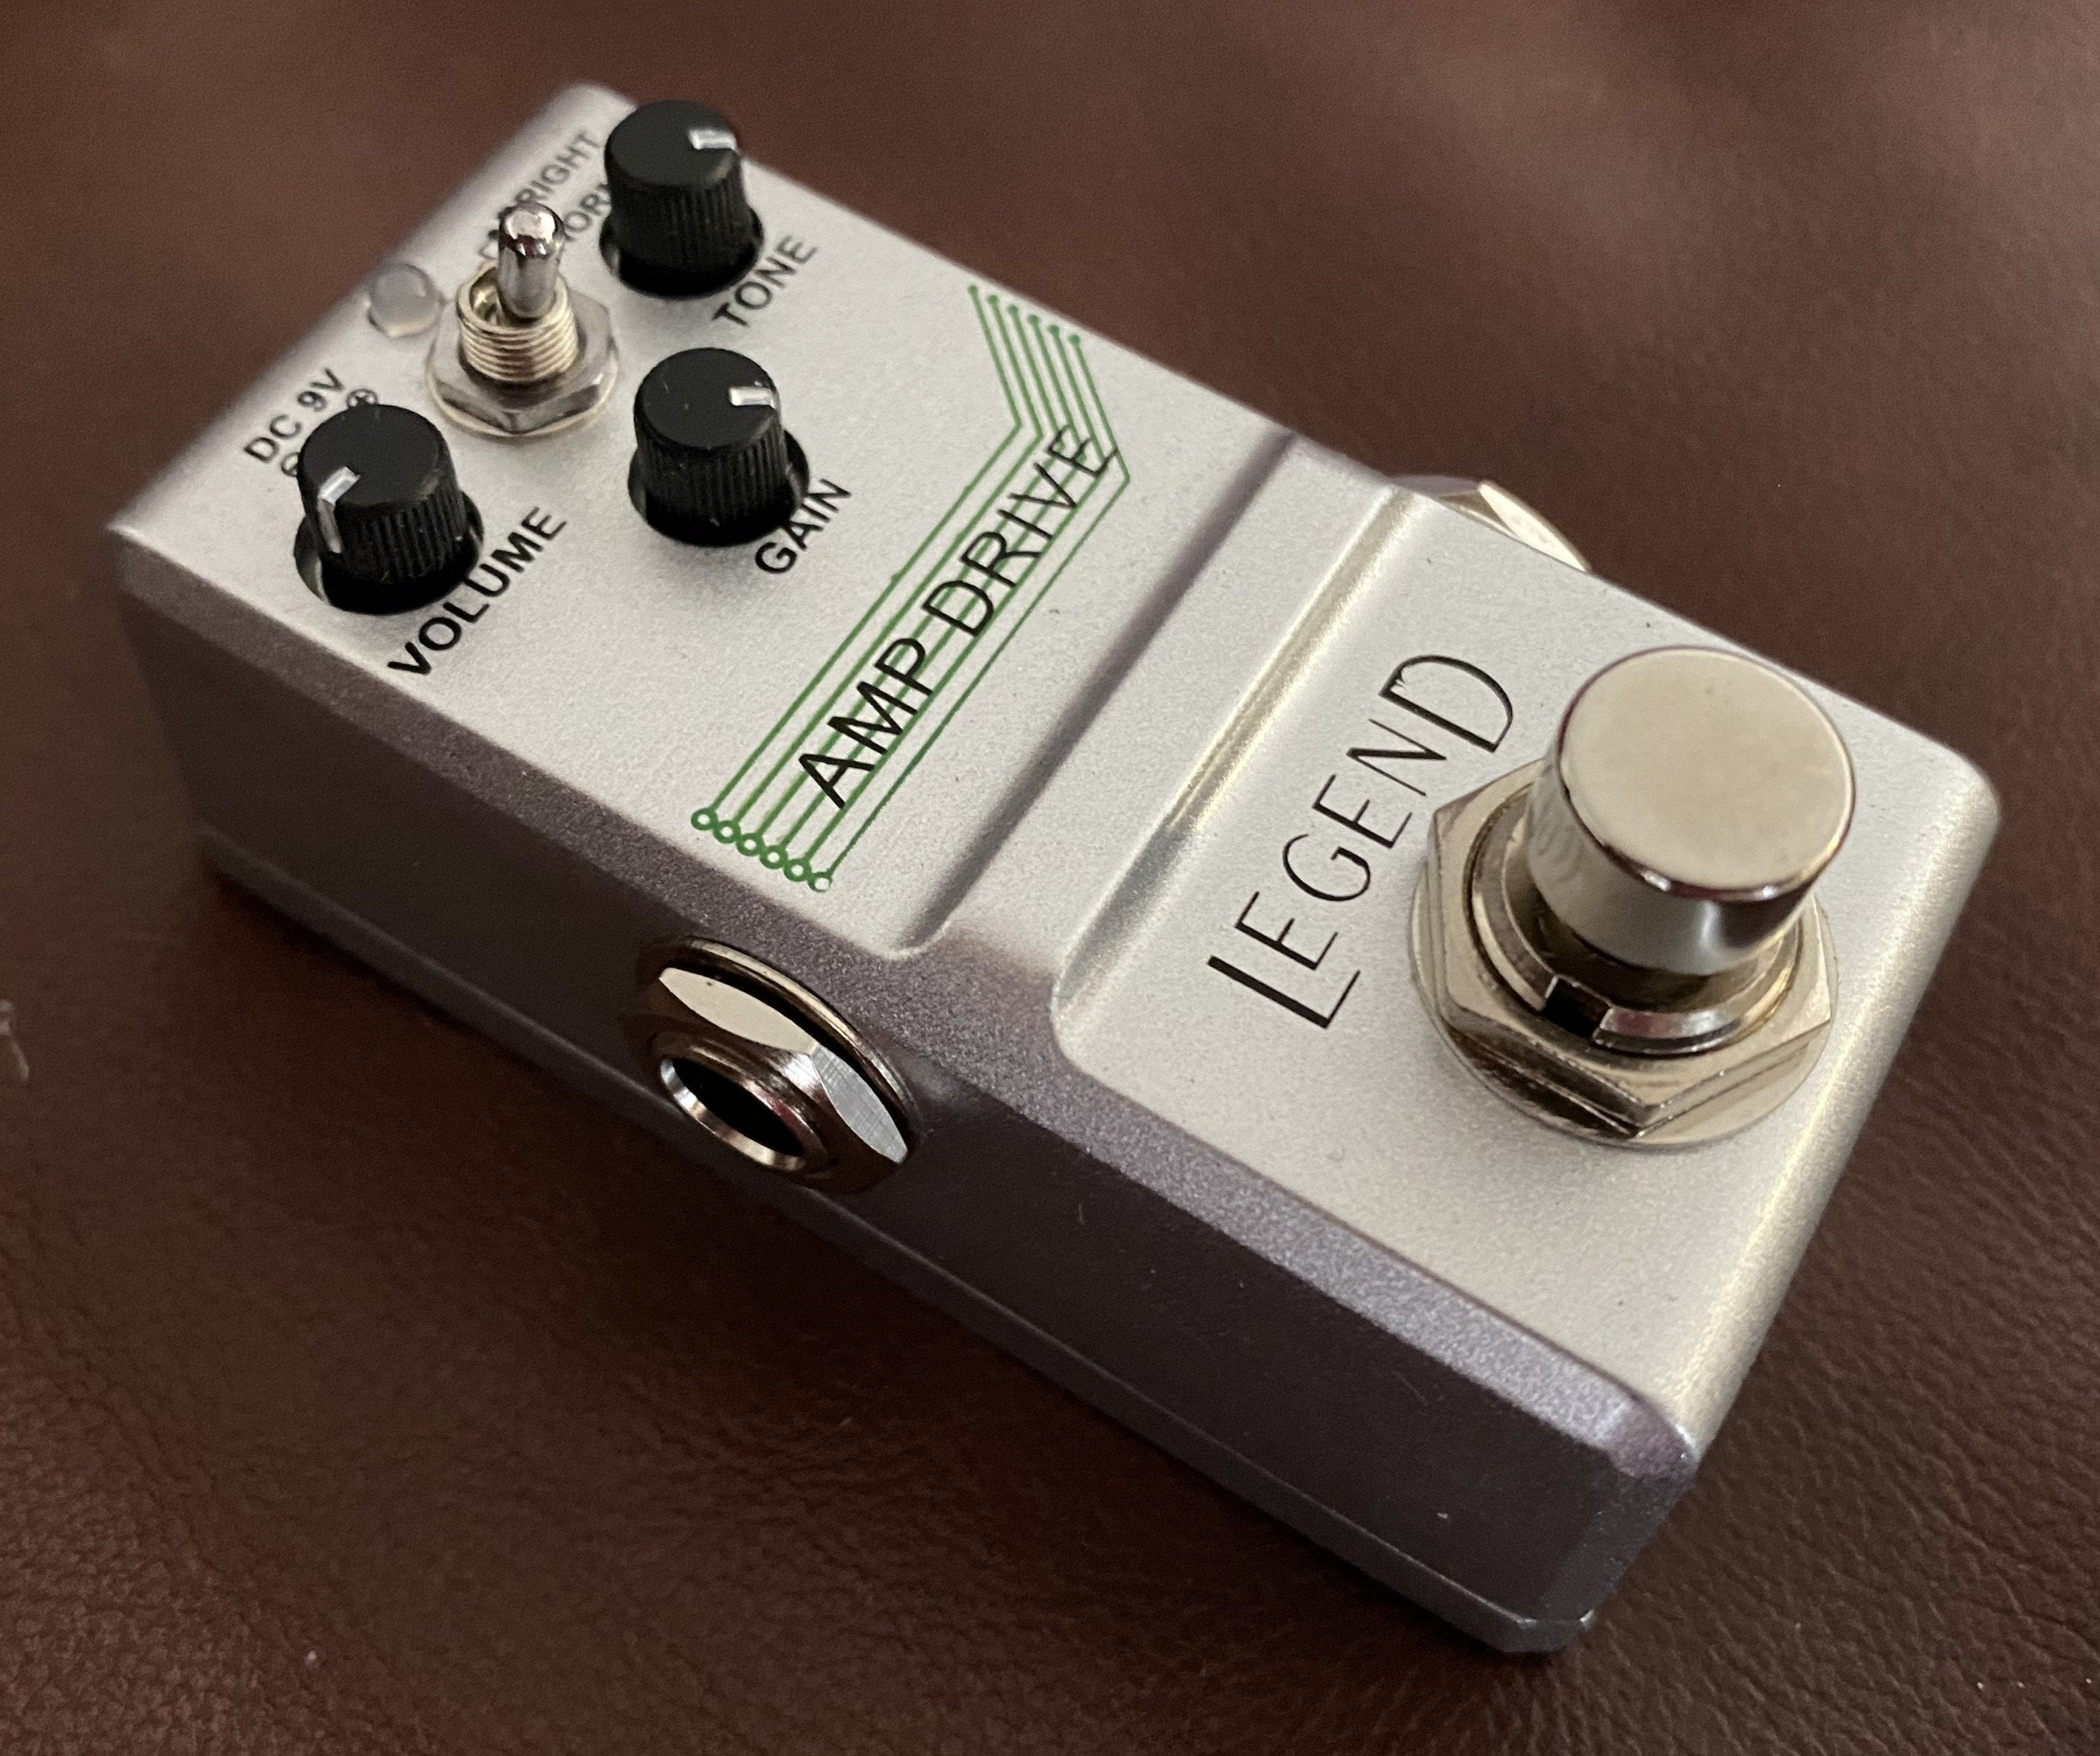 SMJ LEGEND Series Amp Drive Pedal (Blues In a Box!), Accessory for sale at Richards Guitars.